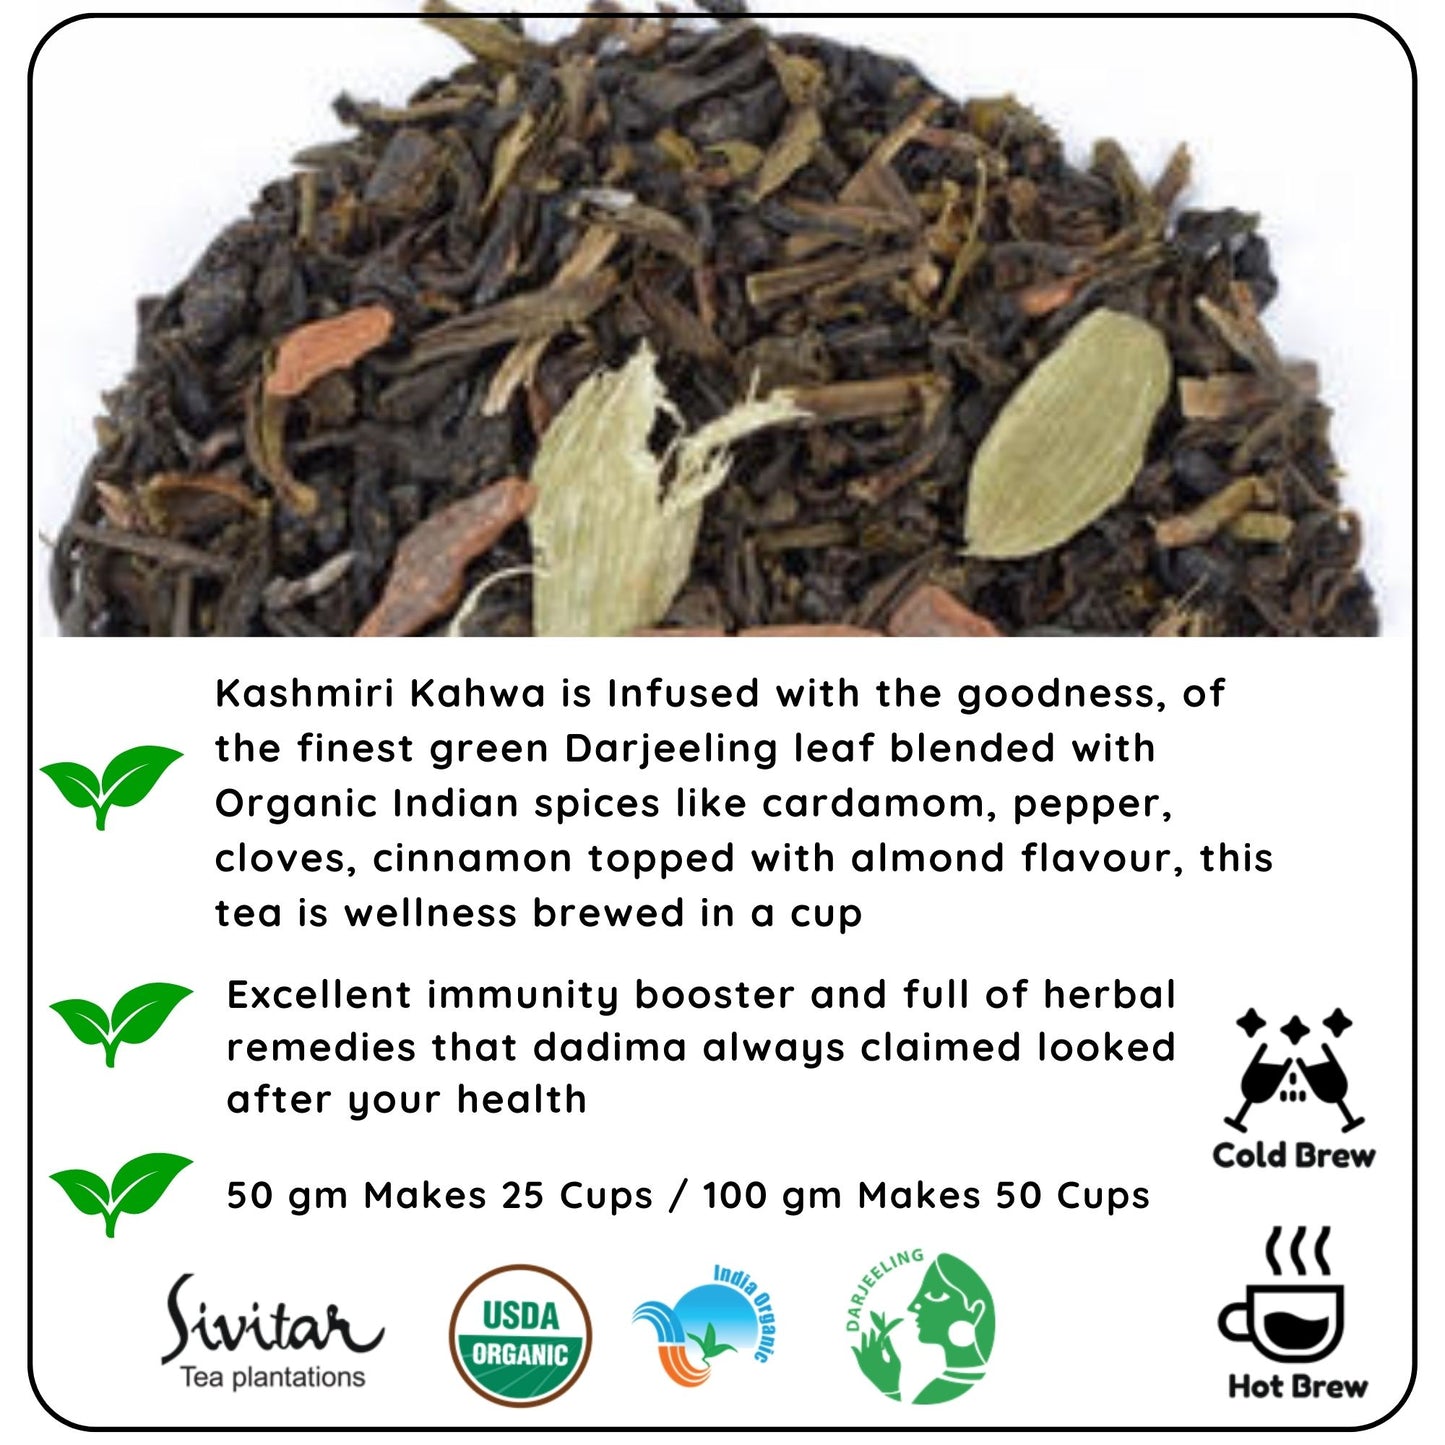 SOOTHING Almond Kashmiri Kahwa - Why You Should Try Almond Kashmiri Kahwa for Cold and Cough Relief - Radhikas Fine Teas and Whatnots